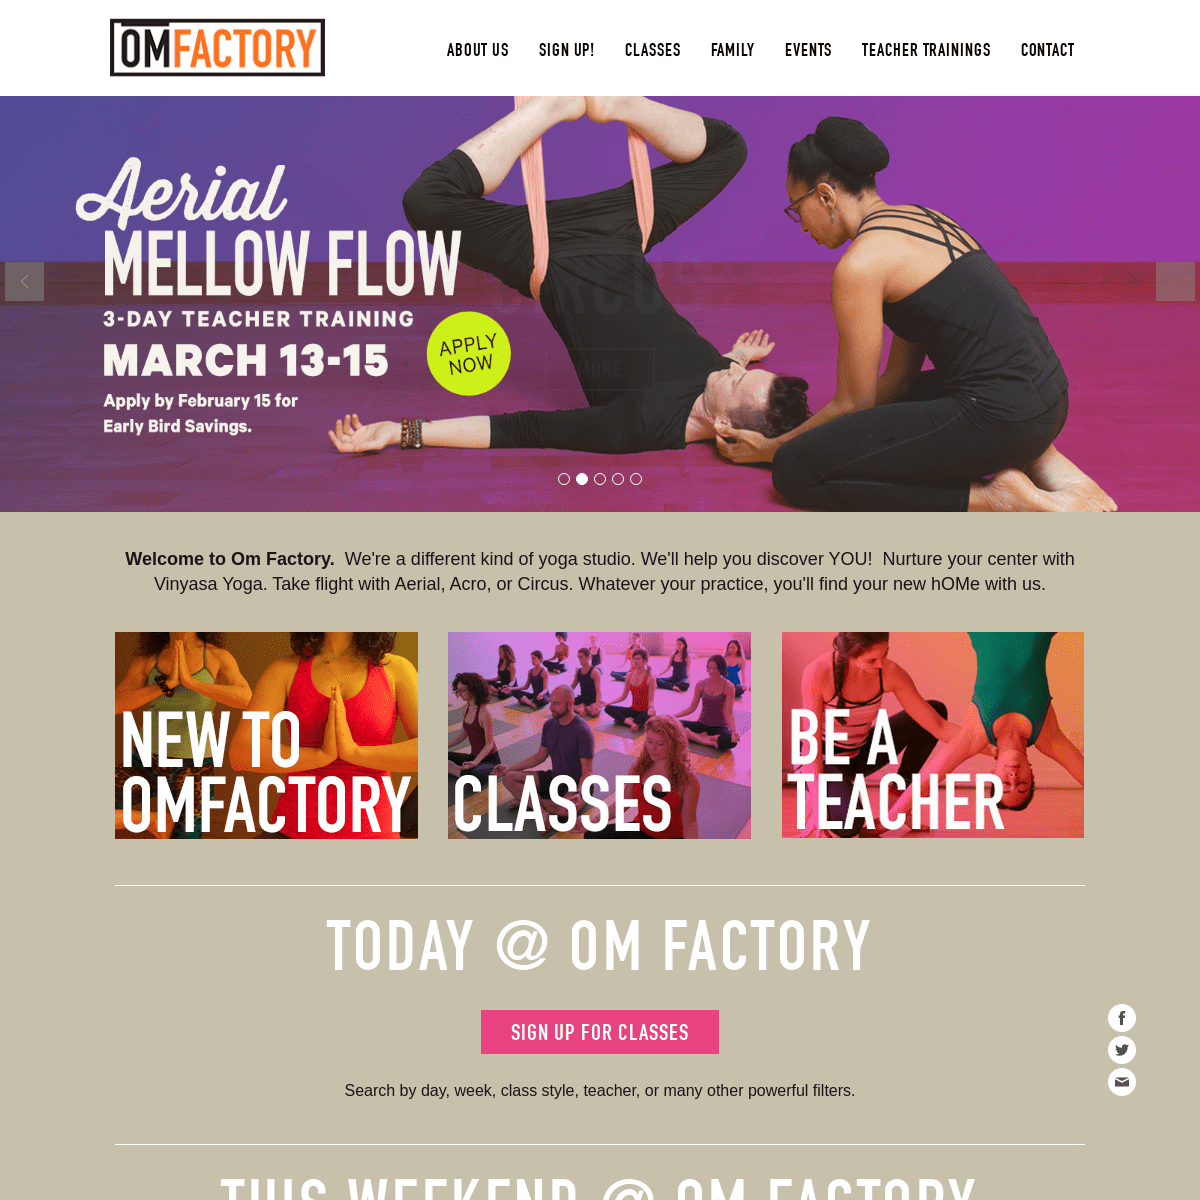 A complete backup of omfactory.yoga